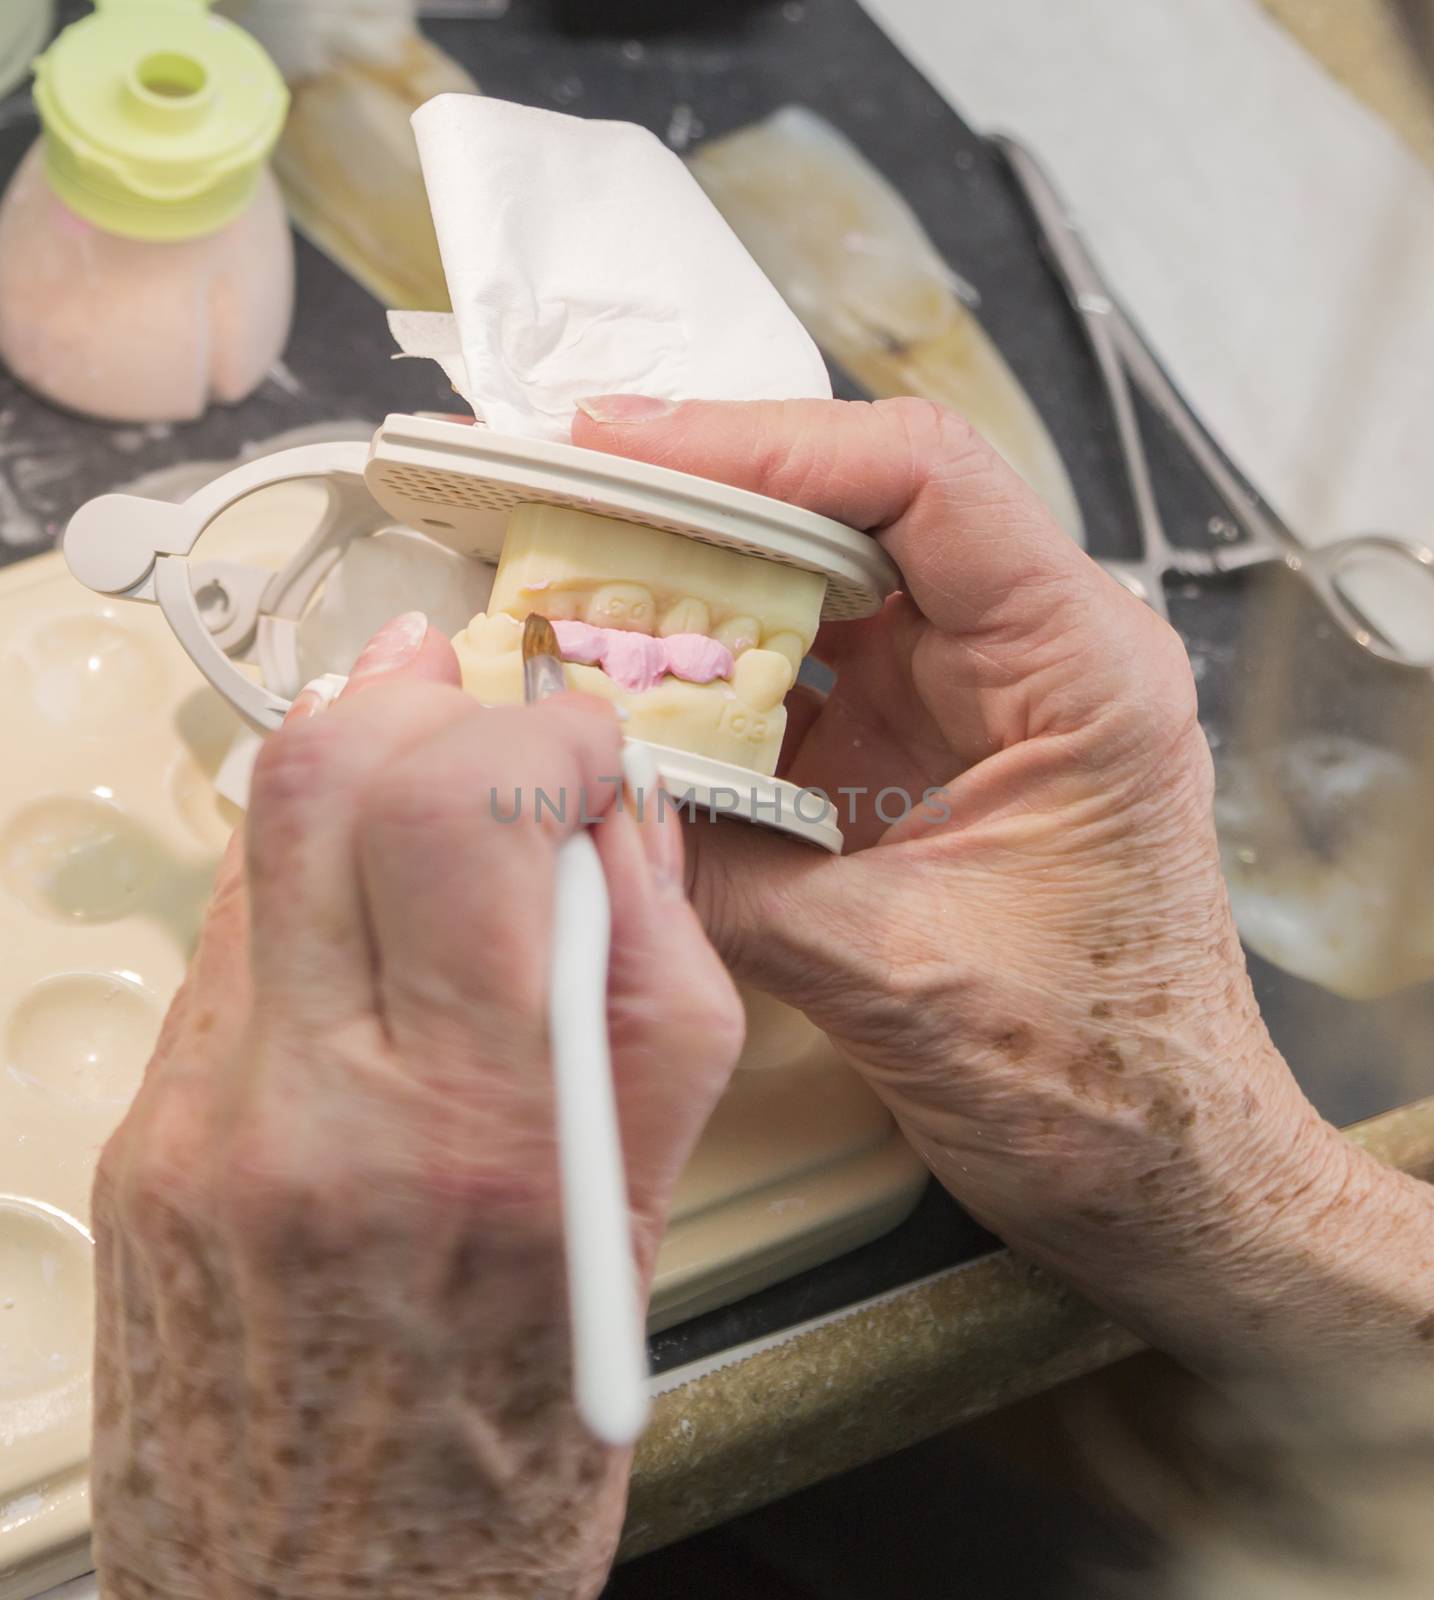 Female Dental Technician Applying Porcelain To A 3D Printed Implant Mold In The Lab.